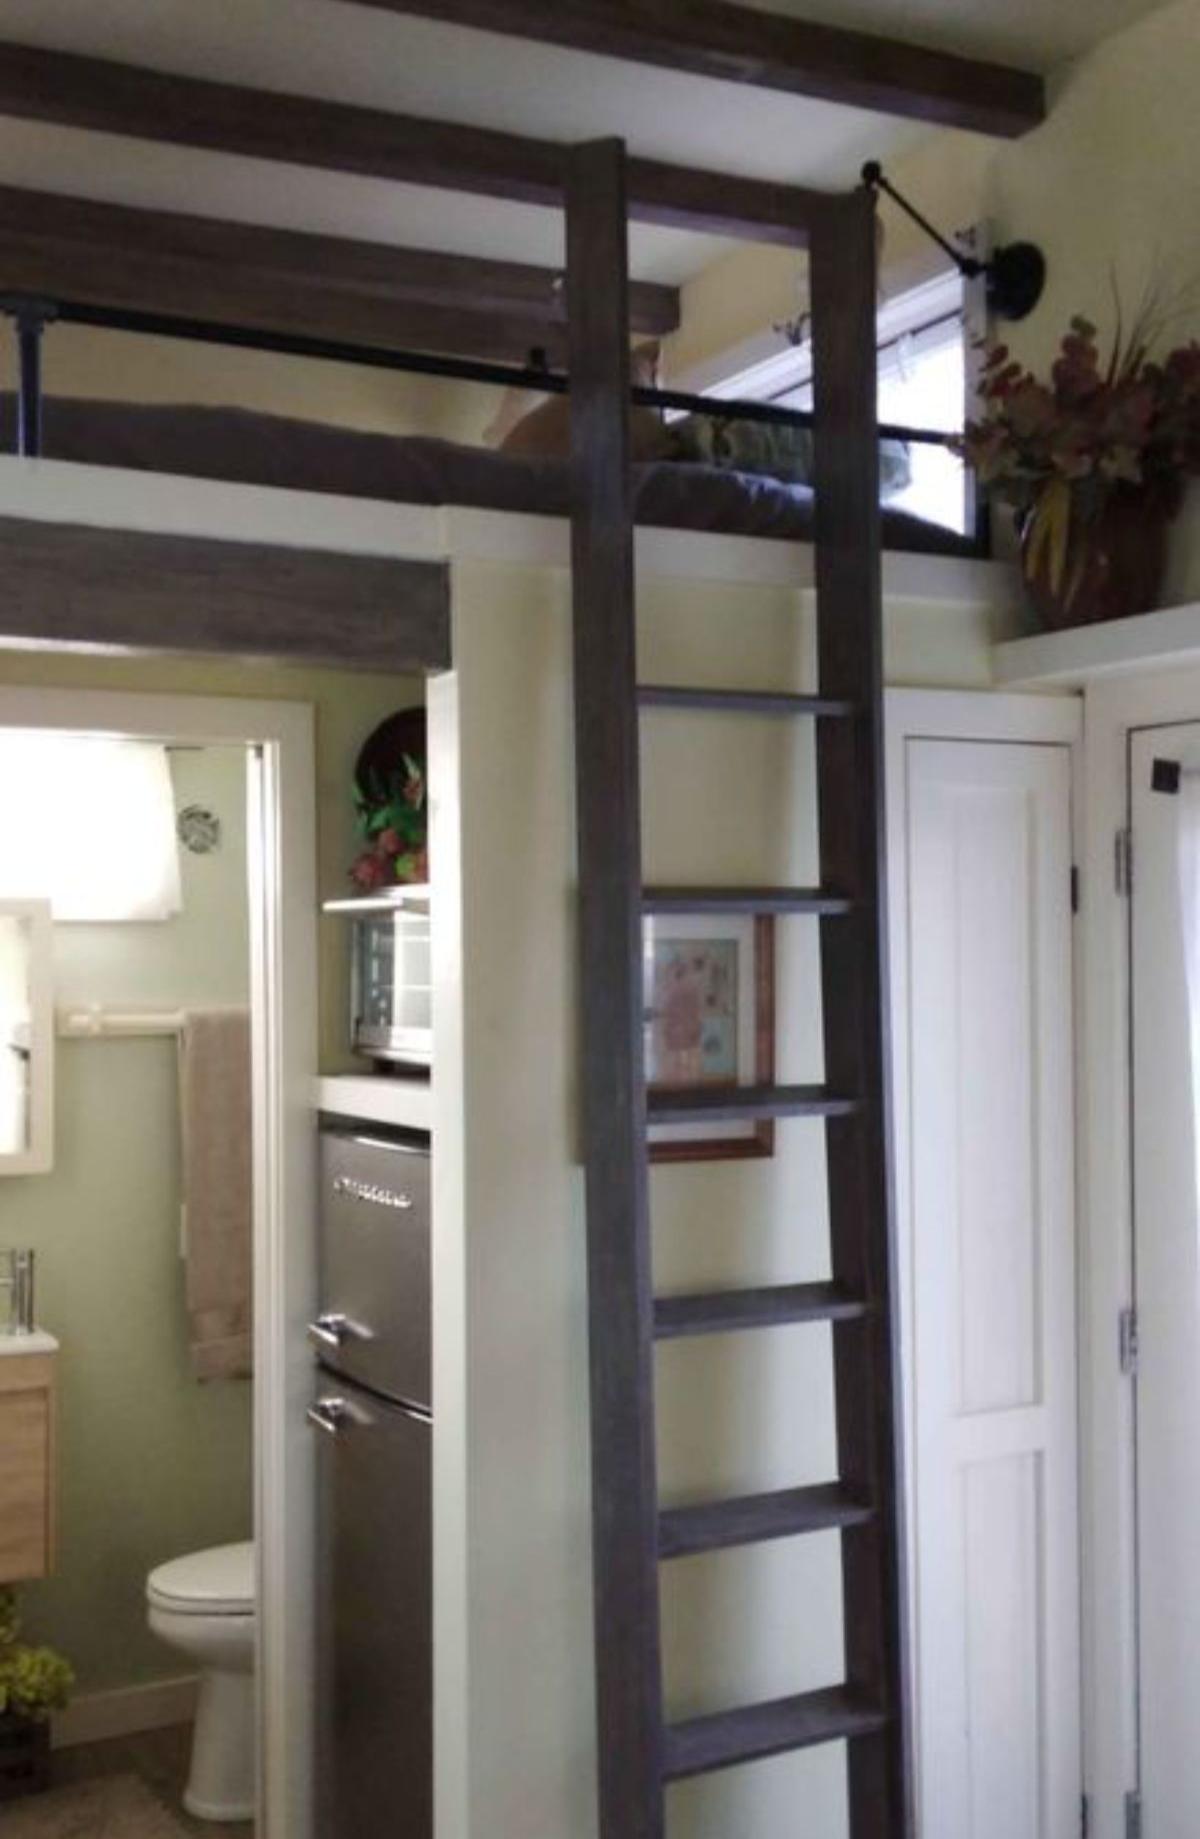 Ladder towards the loft bedroom above the bathroom of 2 Bedroom Tiny House